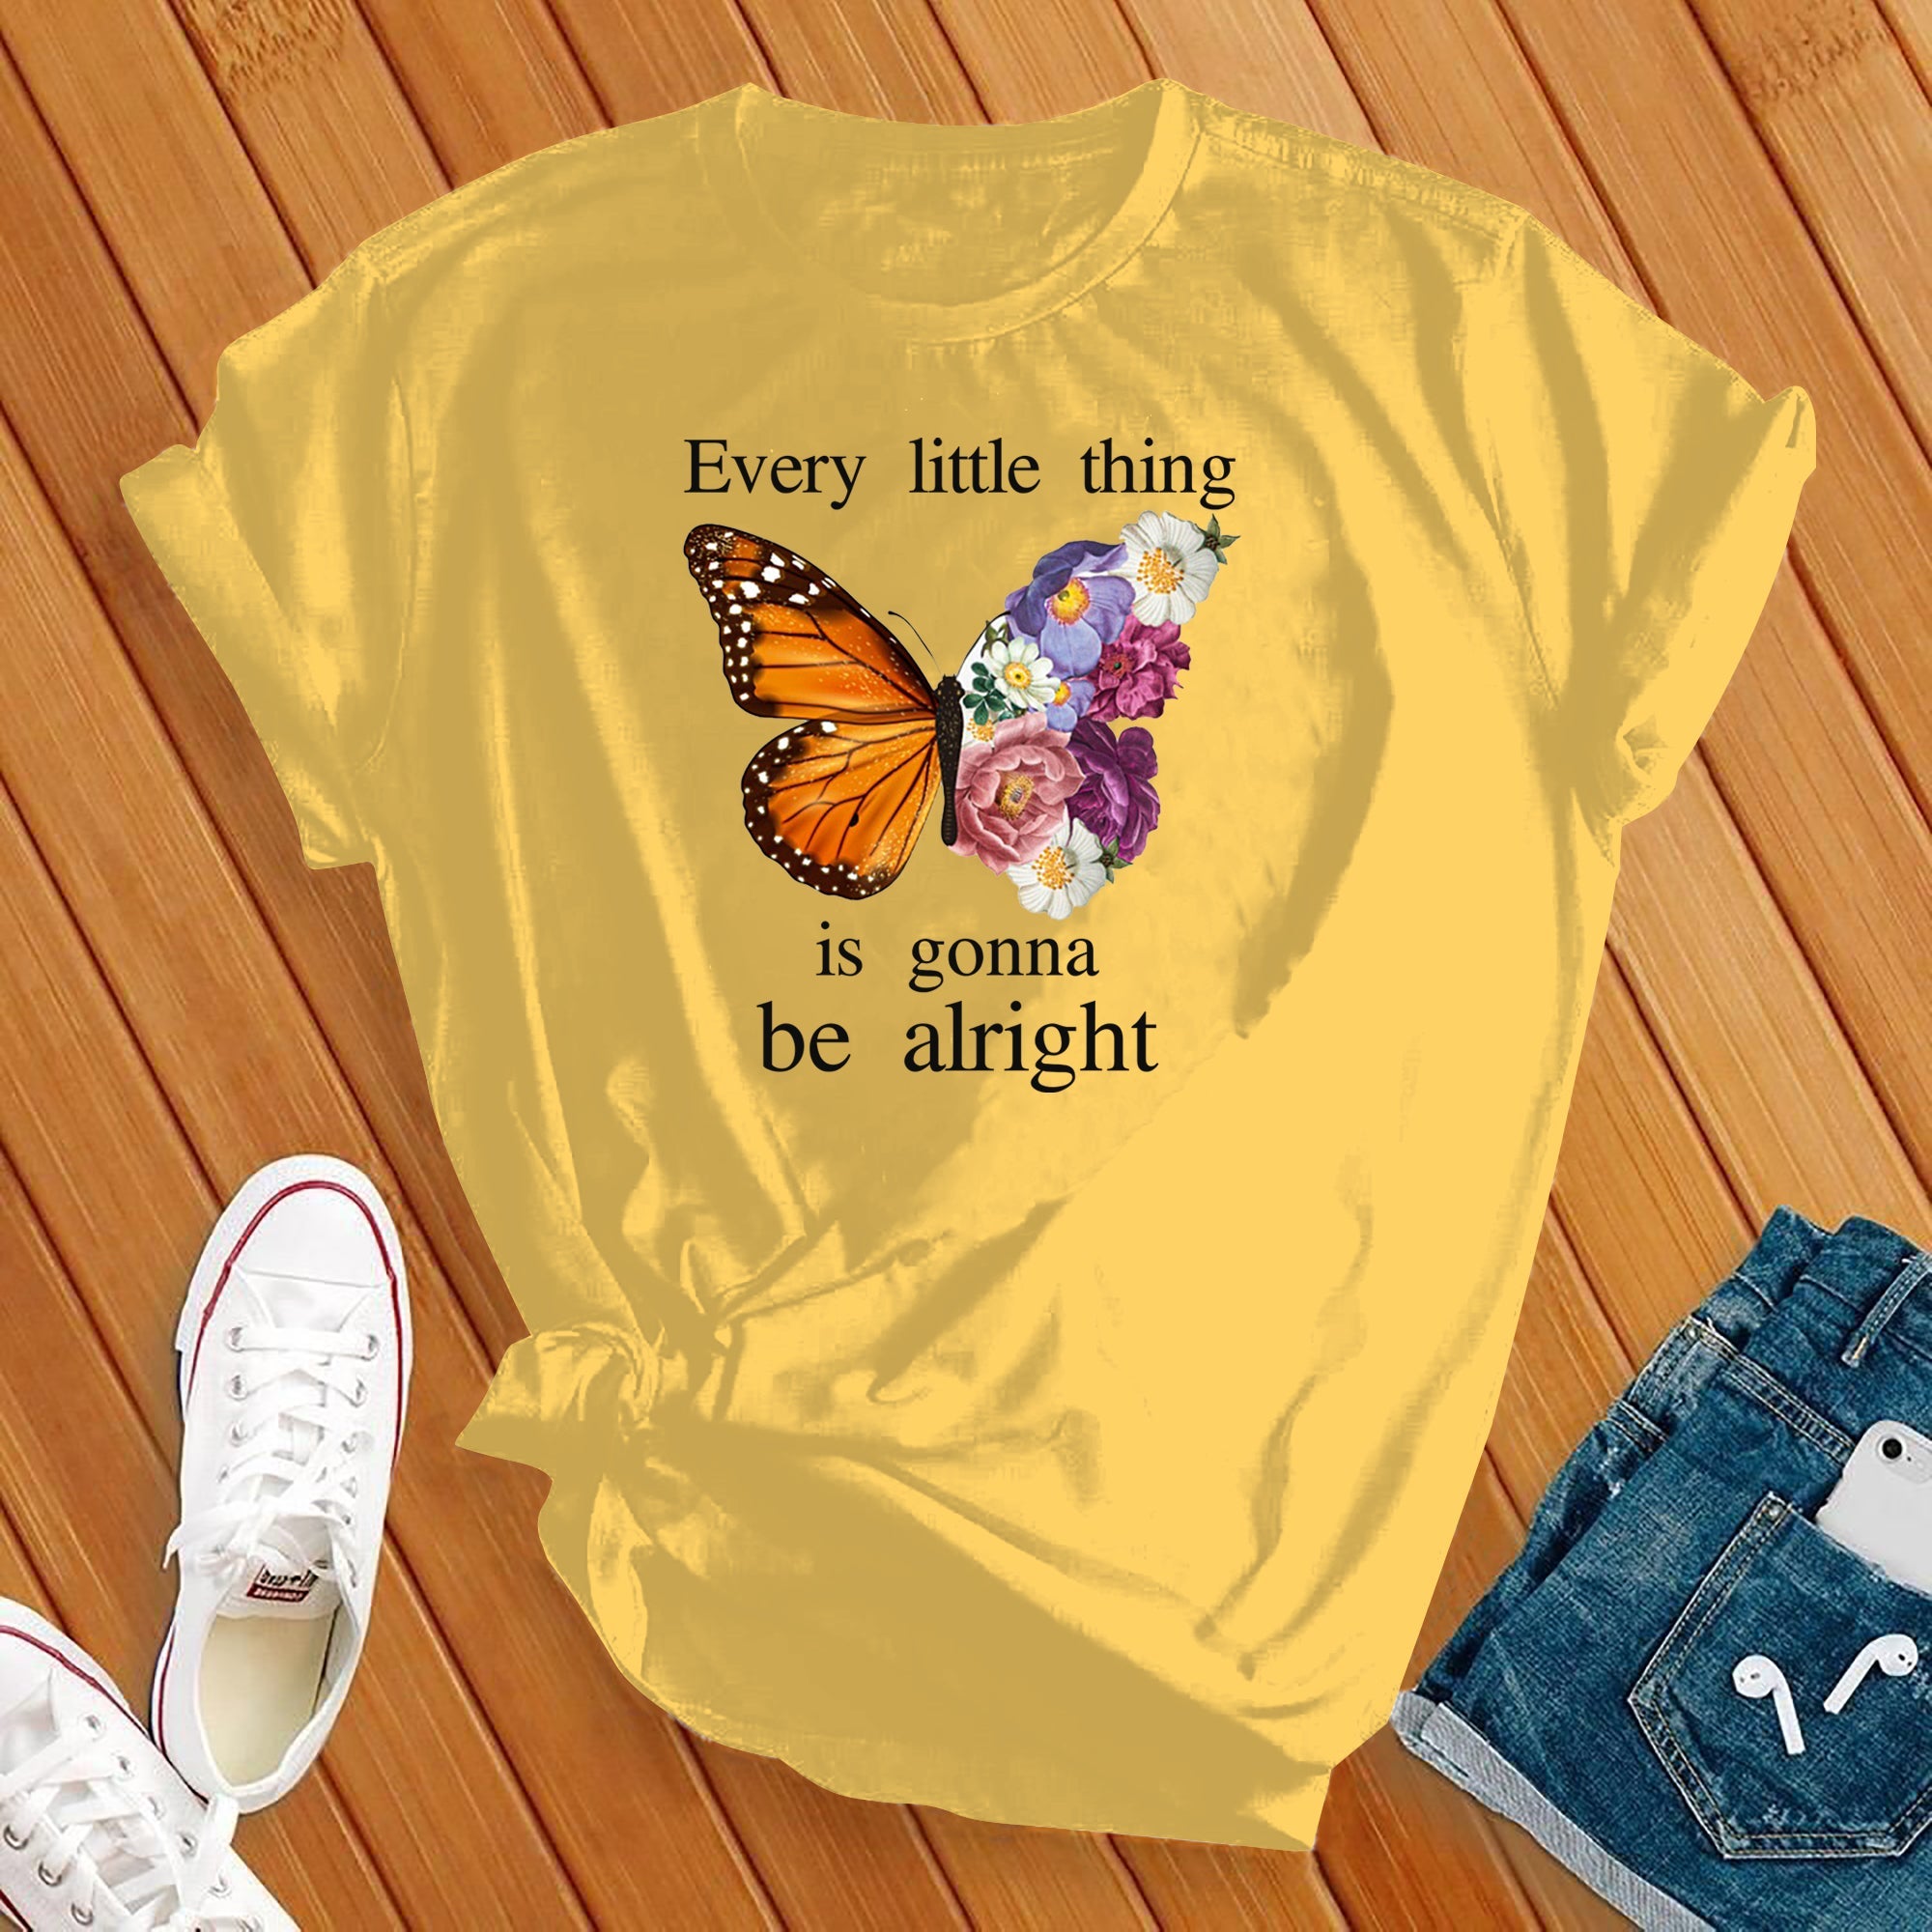 Every Little Thing Tee - Love Tees